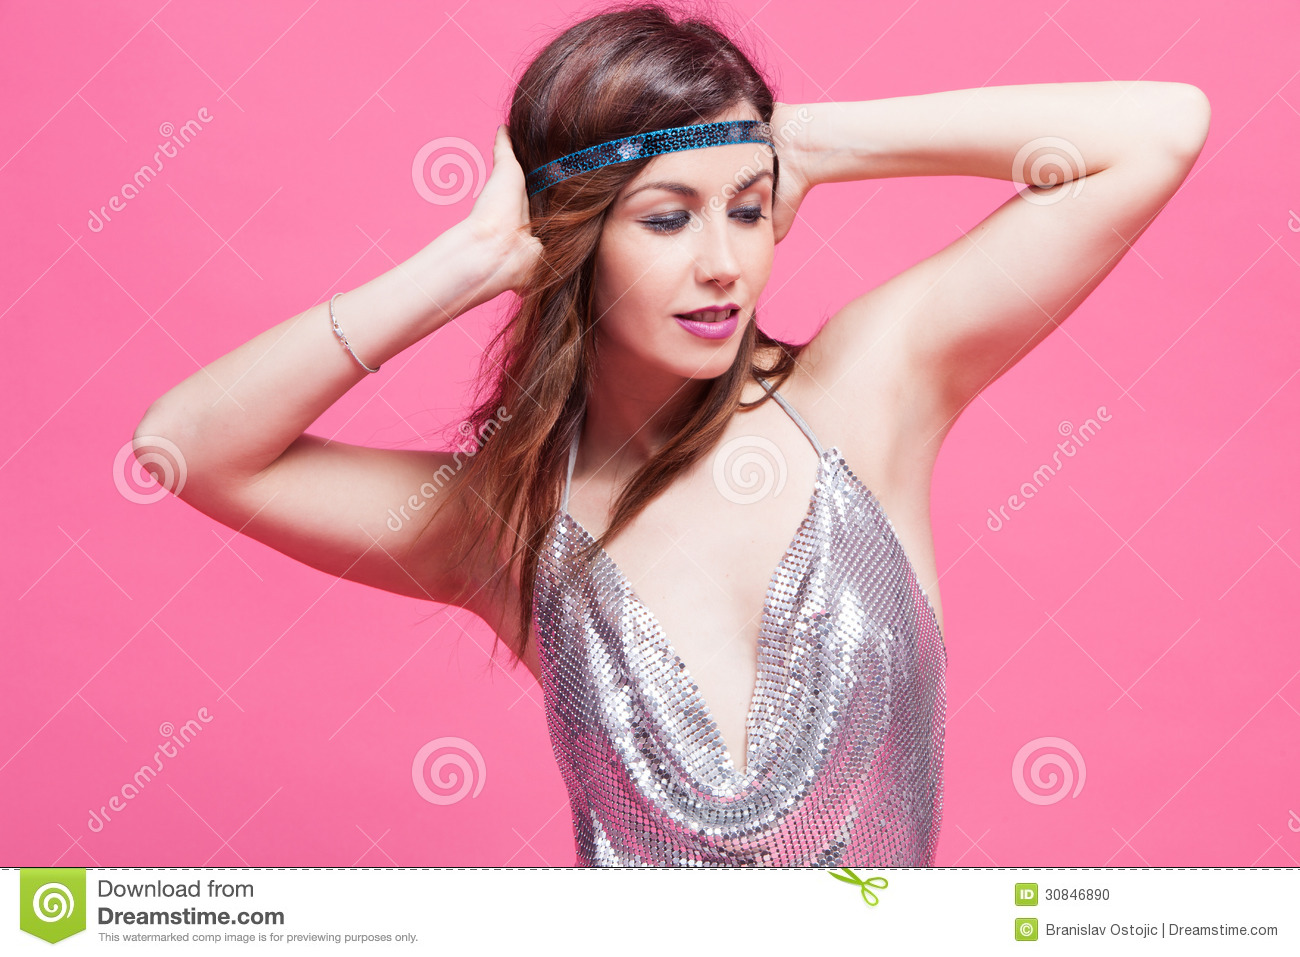 Young Woman In Hippie Style Dance Studio Shot Pink Background